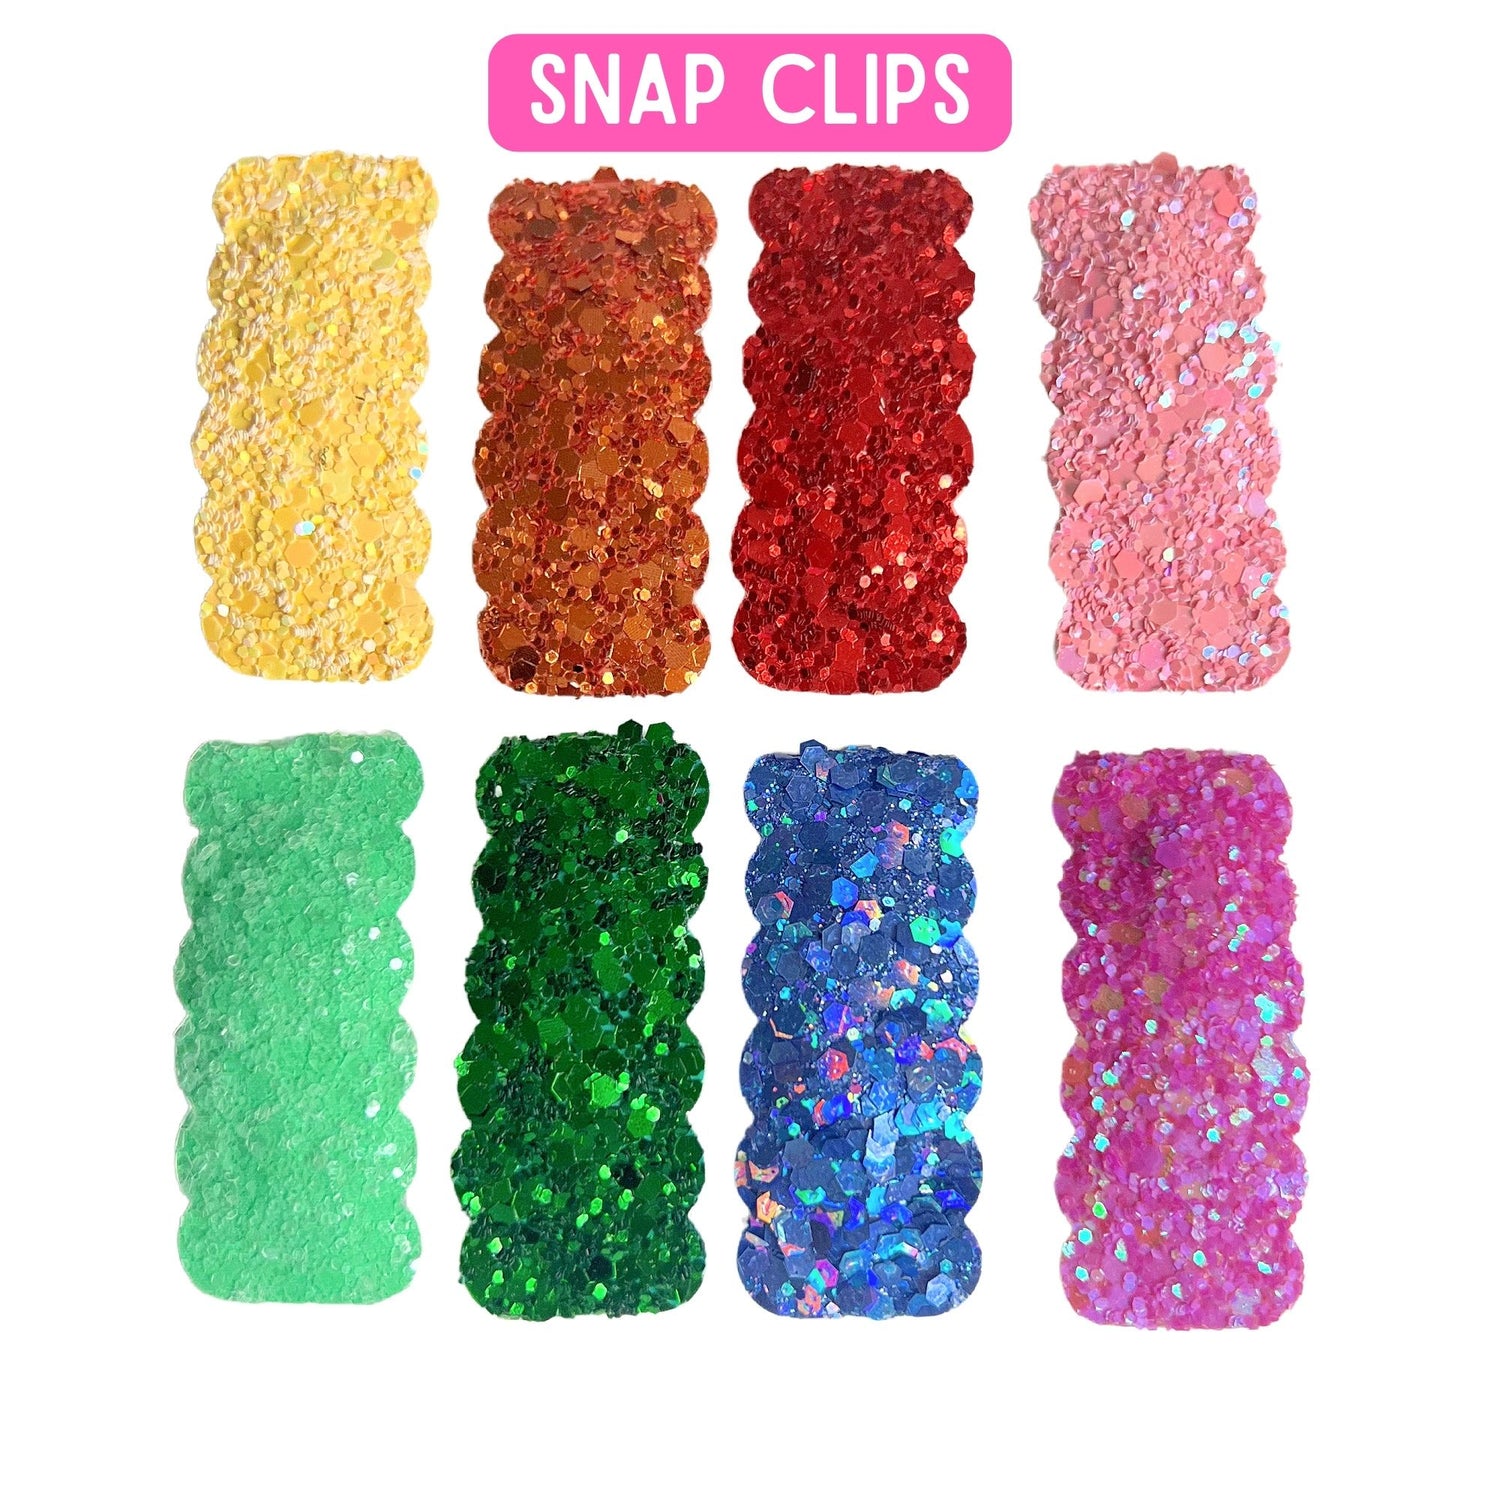 Snap Clips